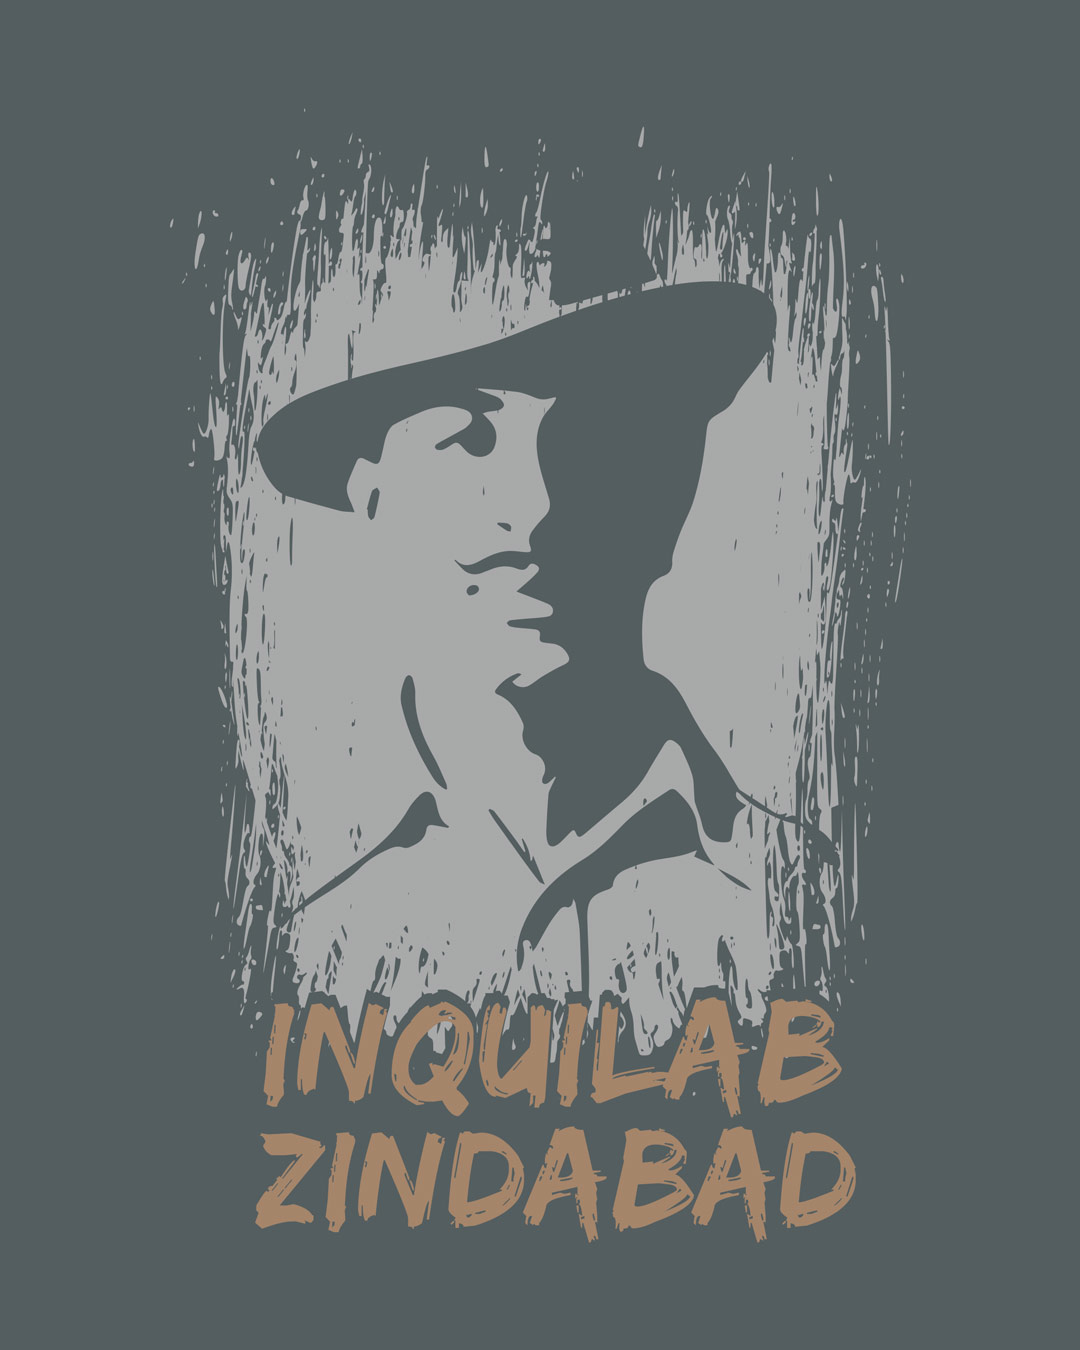 CarMetics Bhagat Singh Inquilab Zindabad car Sticker Exterior Graphics car  Decal Logo Bumper Sticker Patriotic Sticker for Mahindra Xuv 300 - Set of 2  Large Stickers : Amazon.in: Car & Motorbike